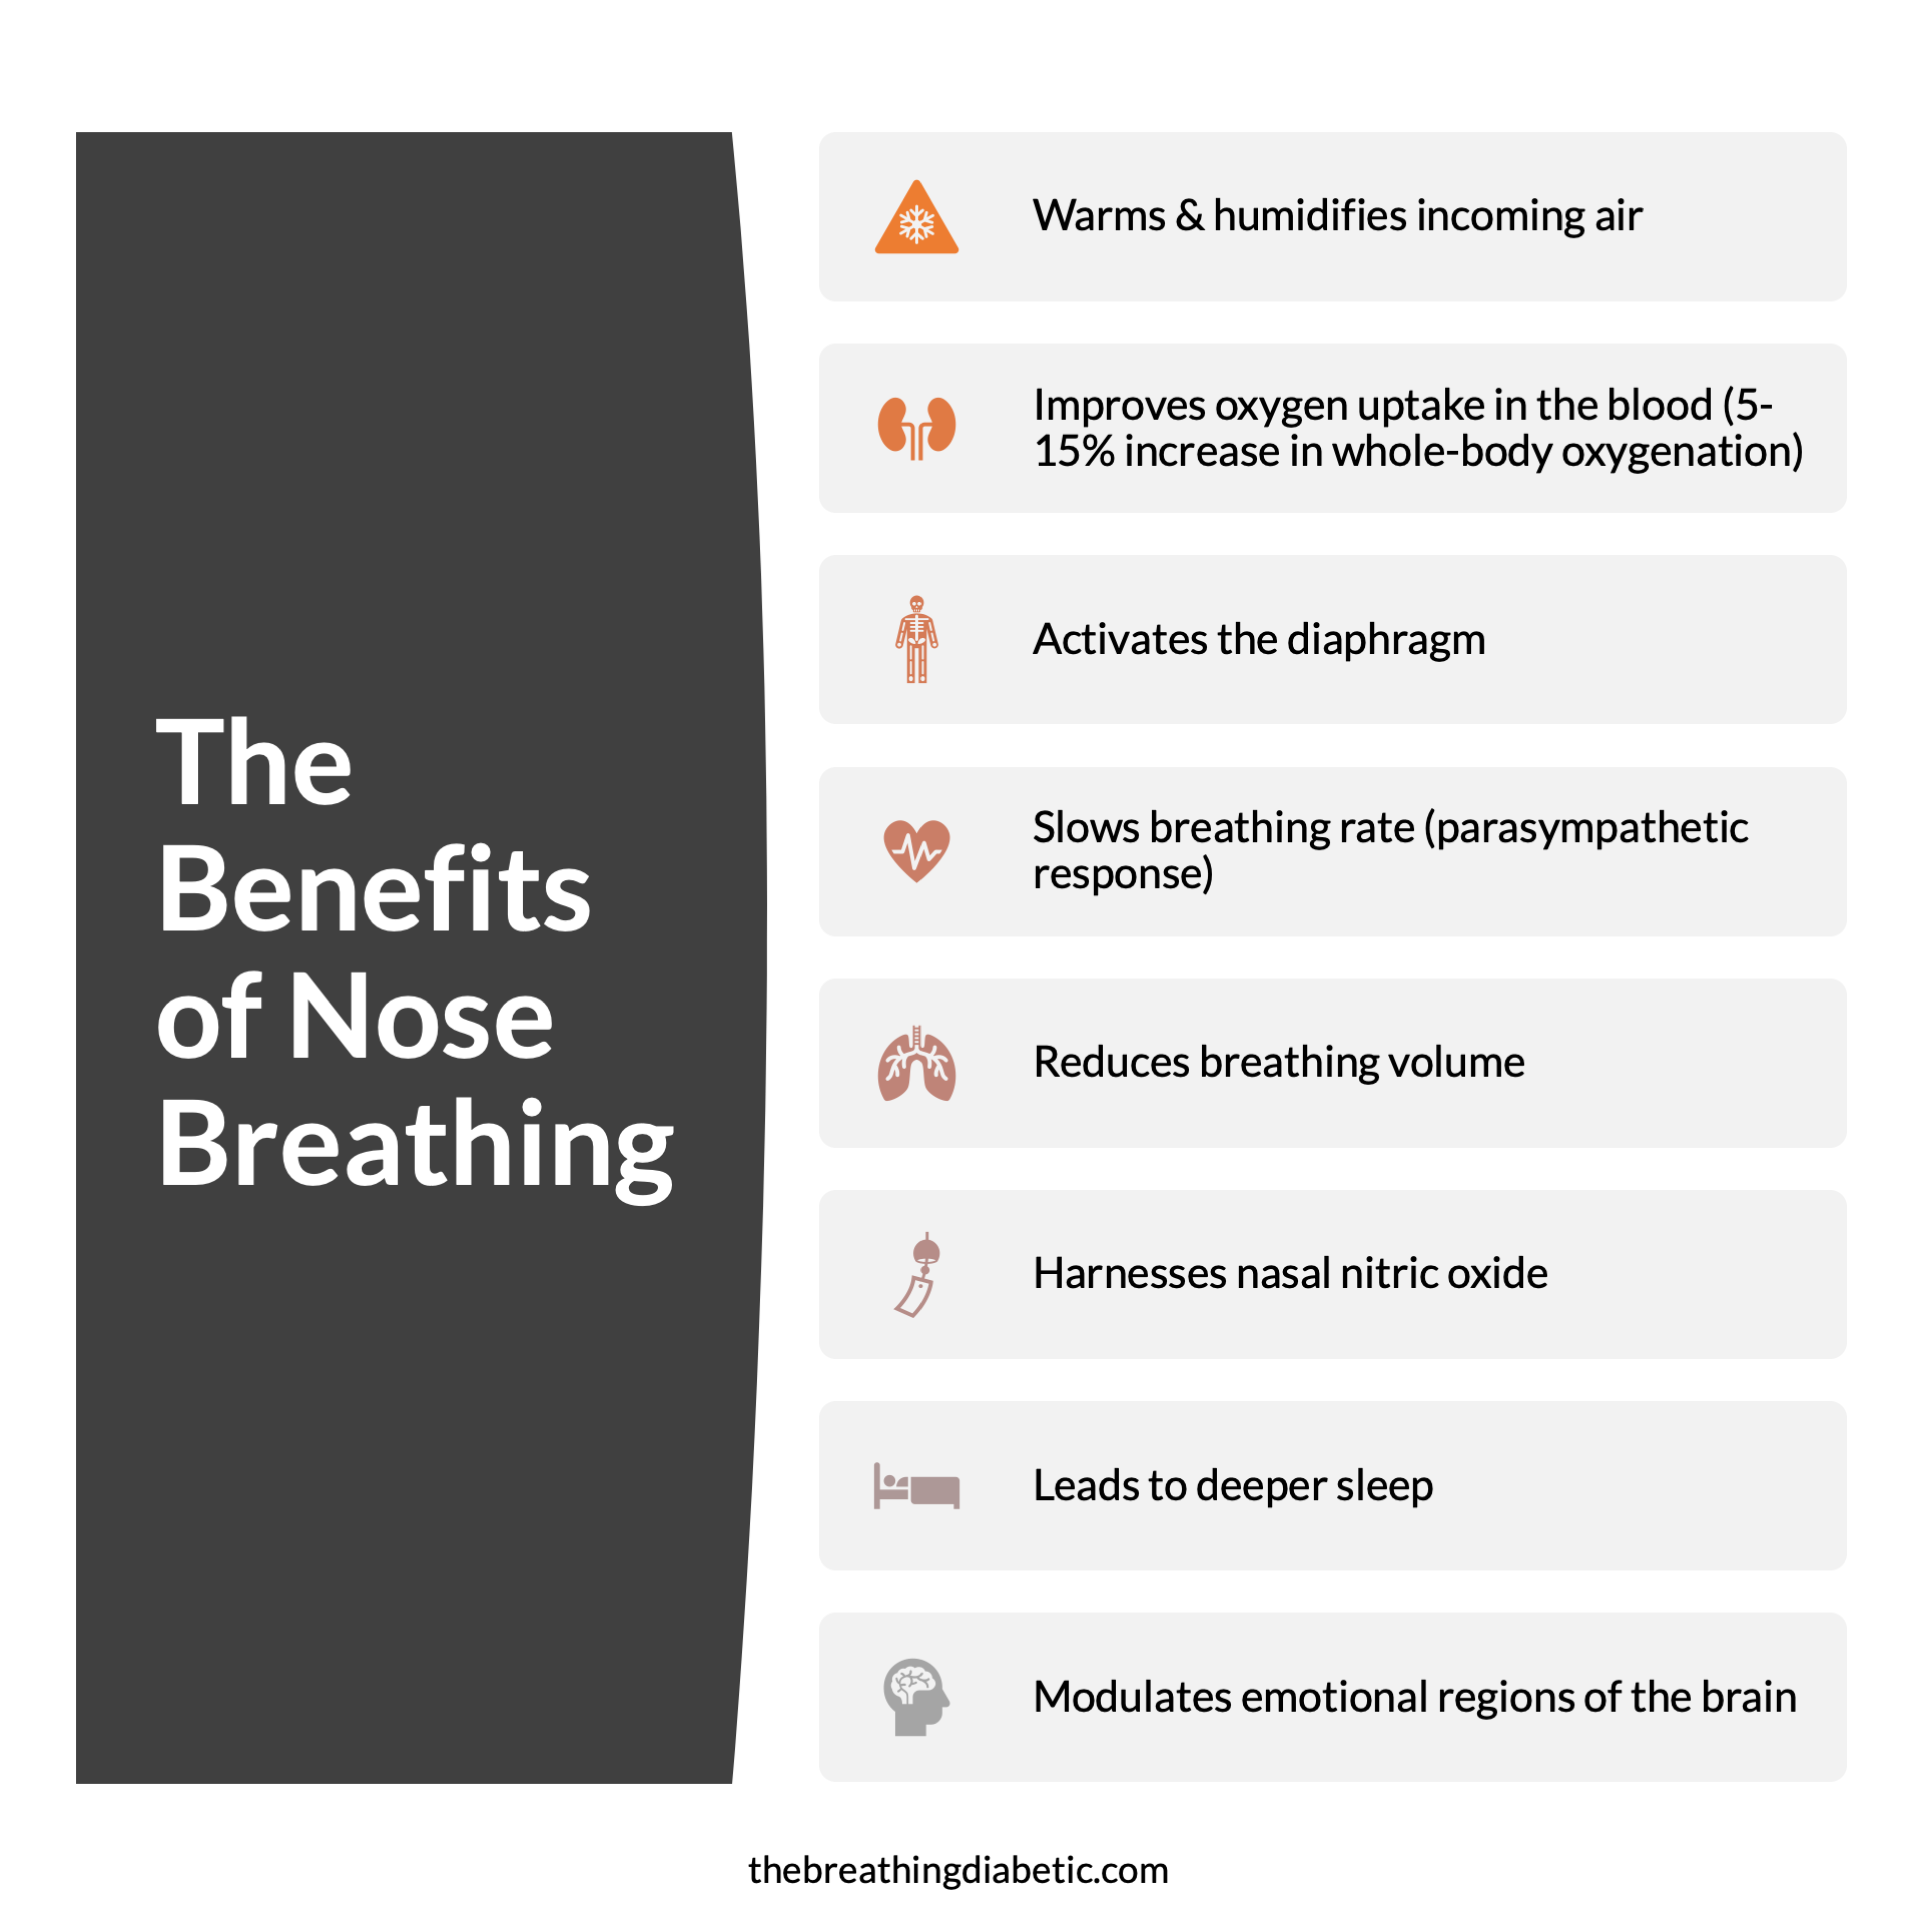 Breathing problems? Try closing your mouth breathing only through nose